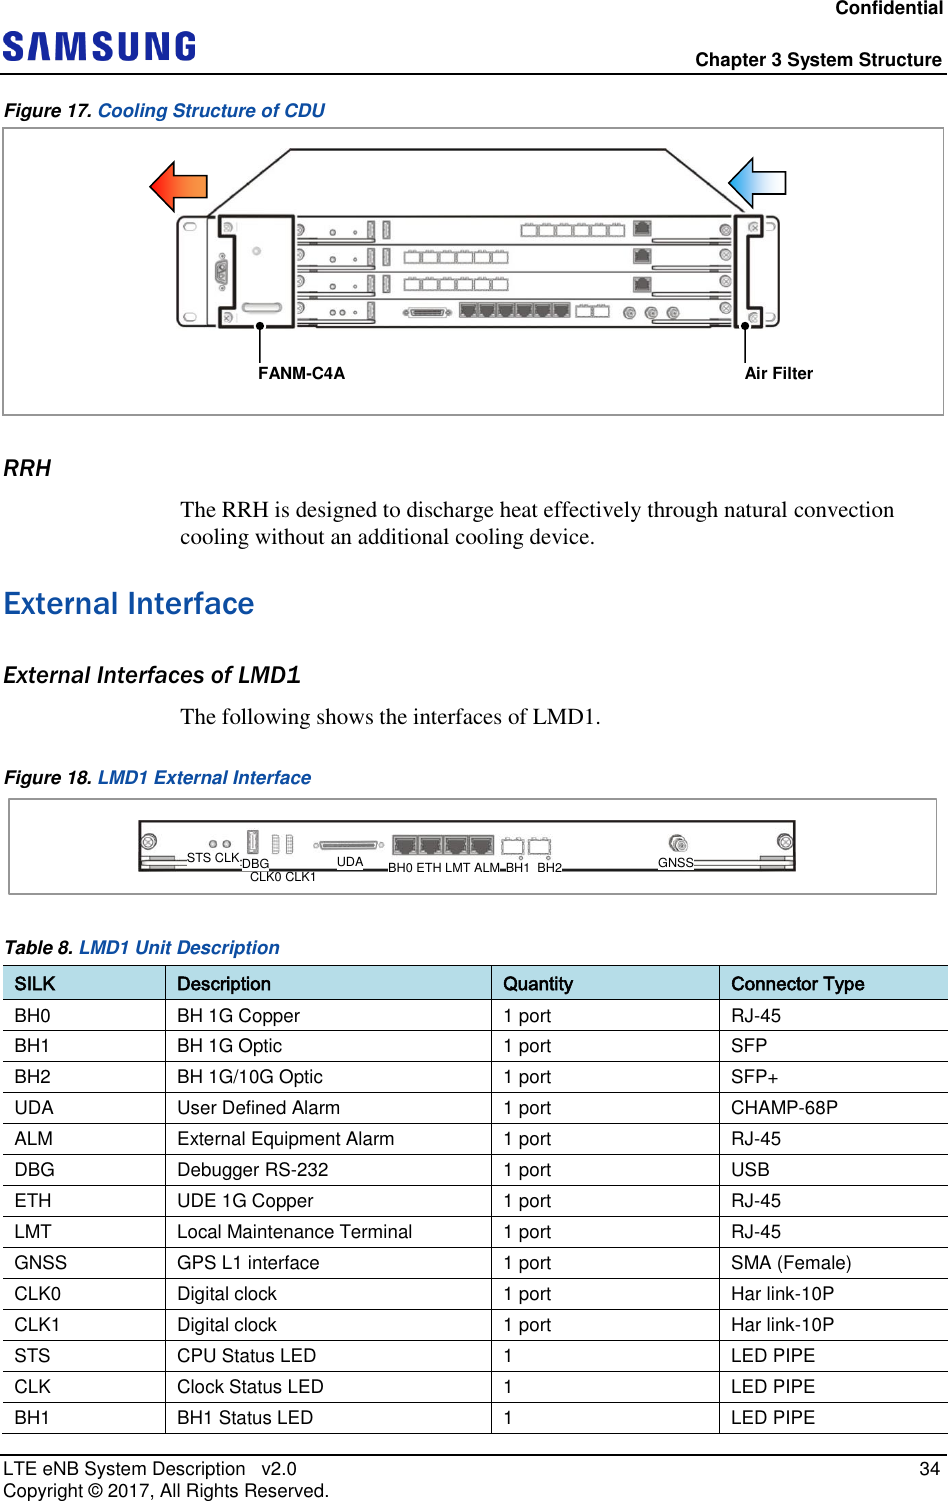 Confidential  Chapter 3 System Structure LTE eNB System Description   v2.0   34 Copyright ©  2017, All Rights Reserved. Figure 17. Cooling Structure of CDU  RRH The RRH is designed to discharge heat effectively through natural convection cooling without an additional cooling device. External Interface External Interfaces of LMD1 The following shows the interfaces of LMD1. Figure 18. LMD1 External Interface STS CLK DBG UDA BH0 ETH LMT ALM GNSSBH1  BH2CLK0 CLK1 Table 8. LMD1 Unit Description SILK Description Quantity Connector Type BH0 BH 1G Copper 1 port RJ-45 BH1 BH 1G Optic 1 port SFP BH2 BH 1G/10G Optic  1 port SFP+ UDA User Defined Alarm  1 port CHAMP-68P ALM External Equipment Alarm 1 port RJ-45 DBG Debugger RS-232 1 port USB ETH UDE 1G Copper 1 port RJ-45 LMT Local Maintenance Terminal  1 port RJ-45 GNSS GPS L1 interface  1 port SMA (Female) CLK0 Digital clock 1 port Har link-10P CLK1 Digital clock 1 port Har link-10P STS CPU Status LED 1  LED PIPE CLK Clock Status LED 1  LED PIPE BH1 BH1 Status LED 1 LED PIPE FANM-C4A Air Filter 